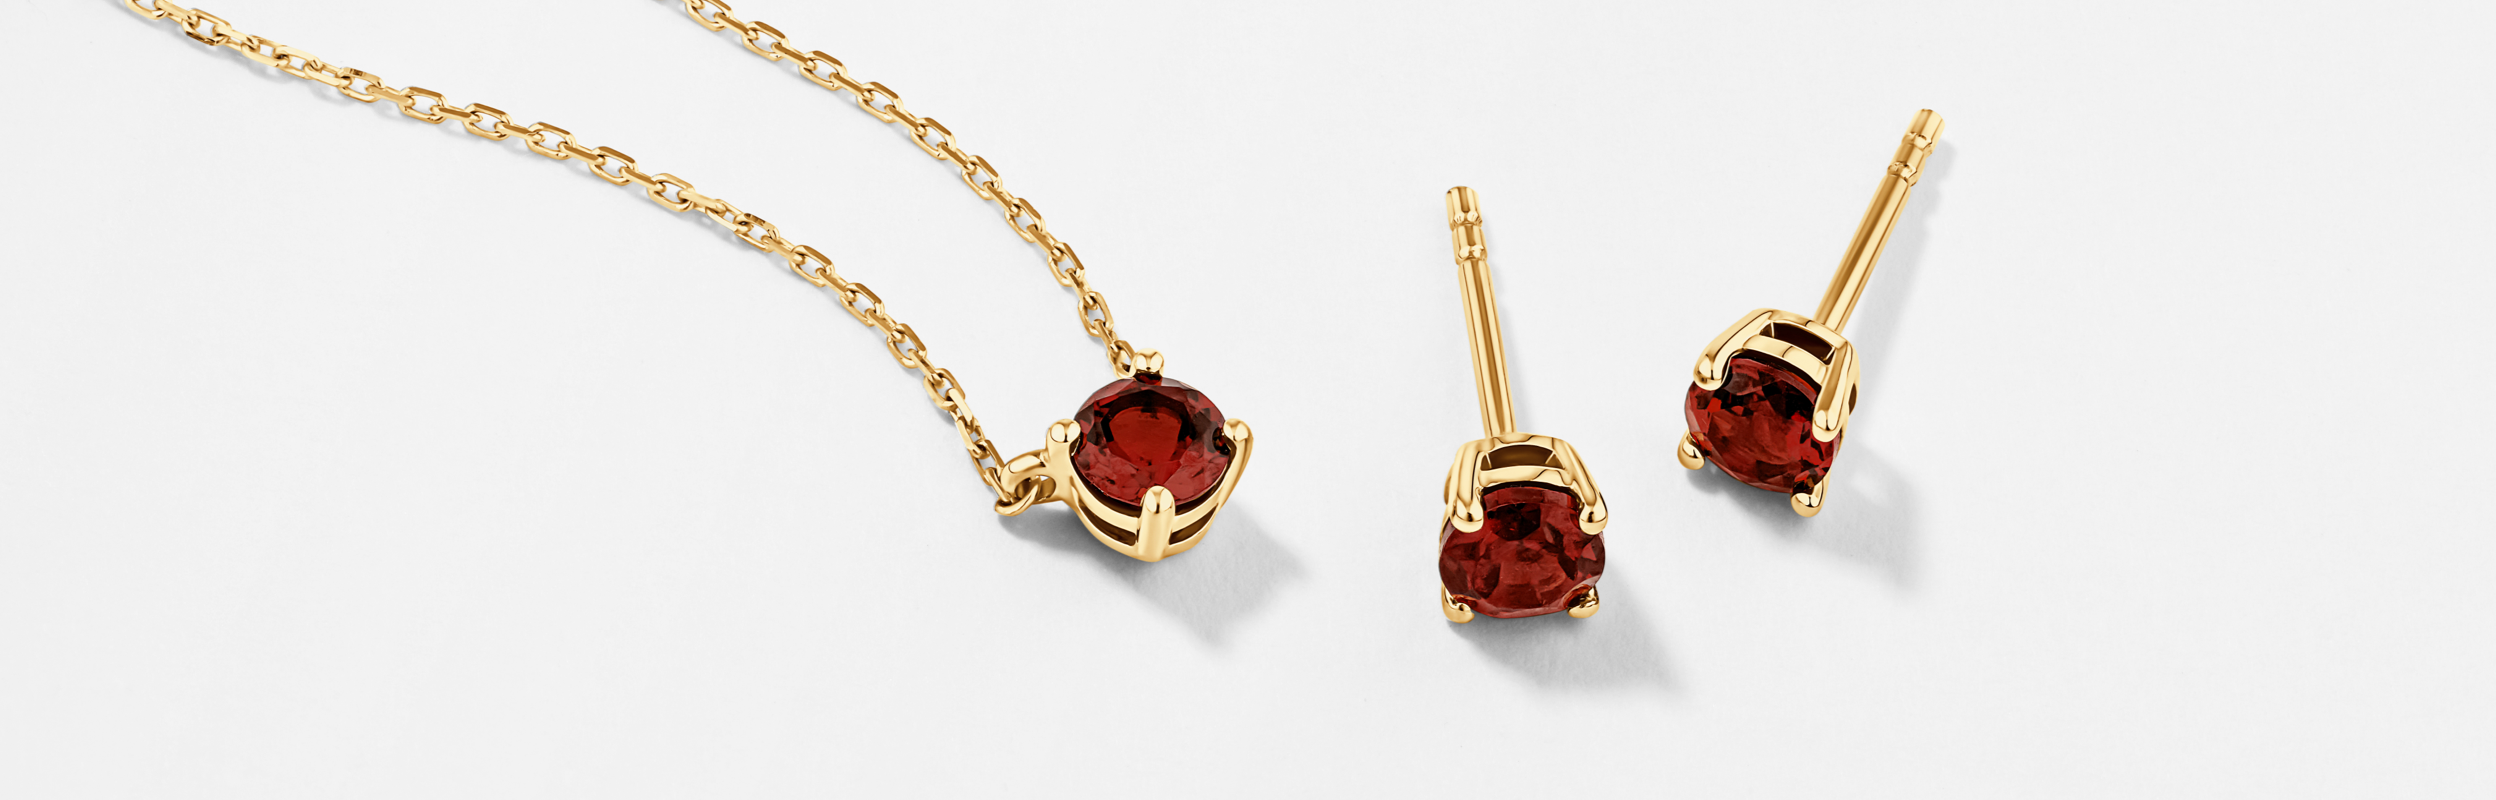 january birthstone jewellery with garnets in yellow gold